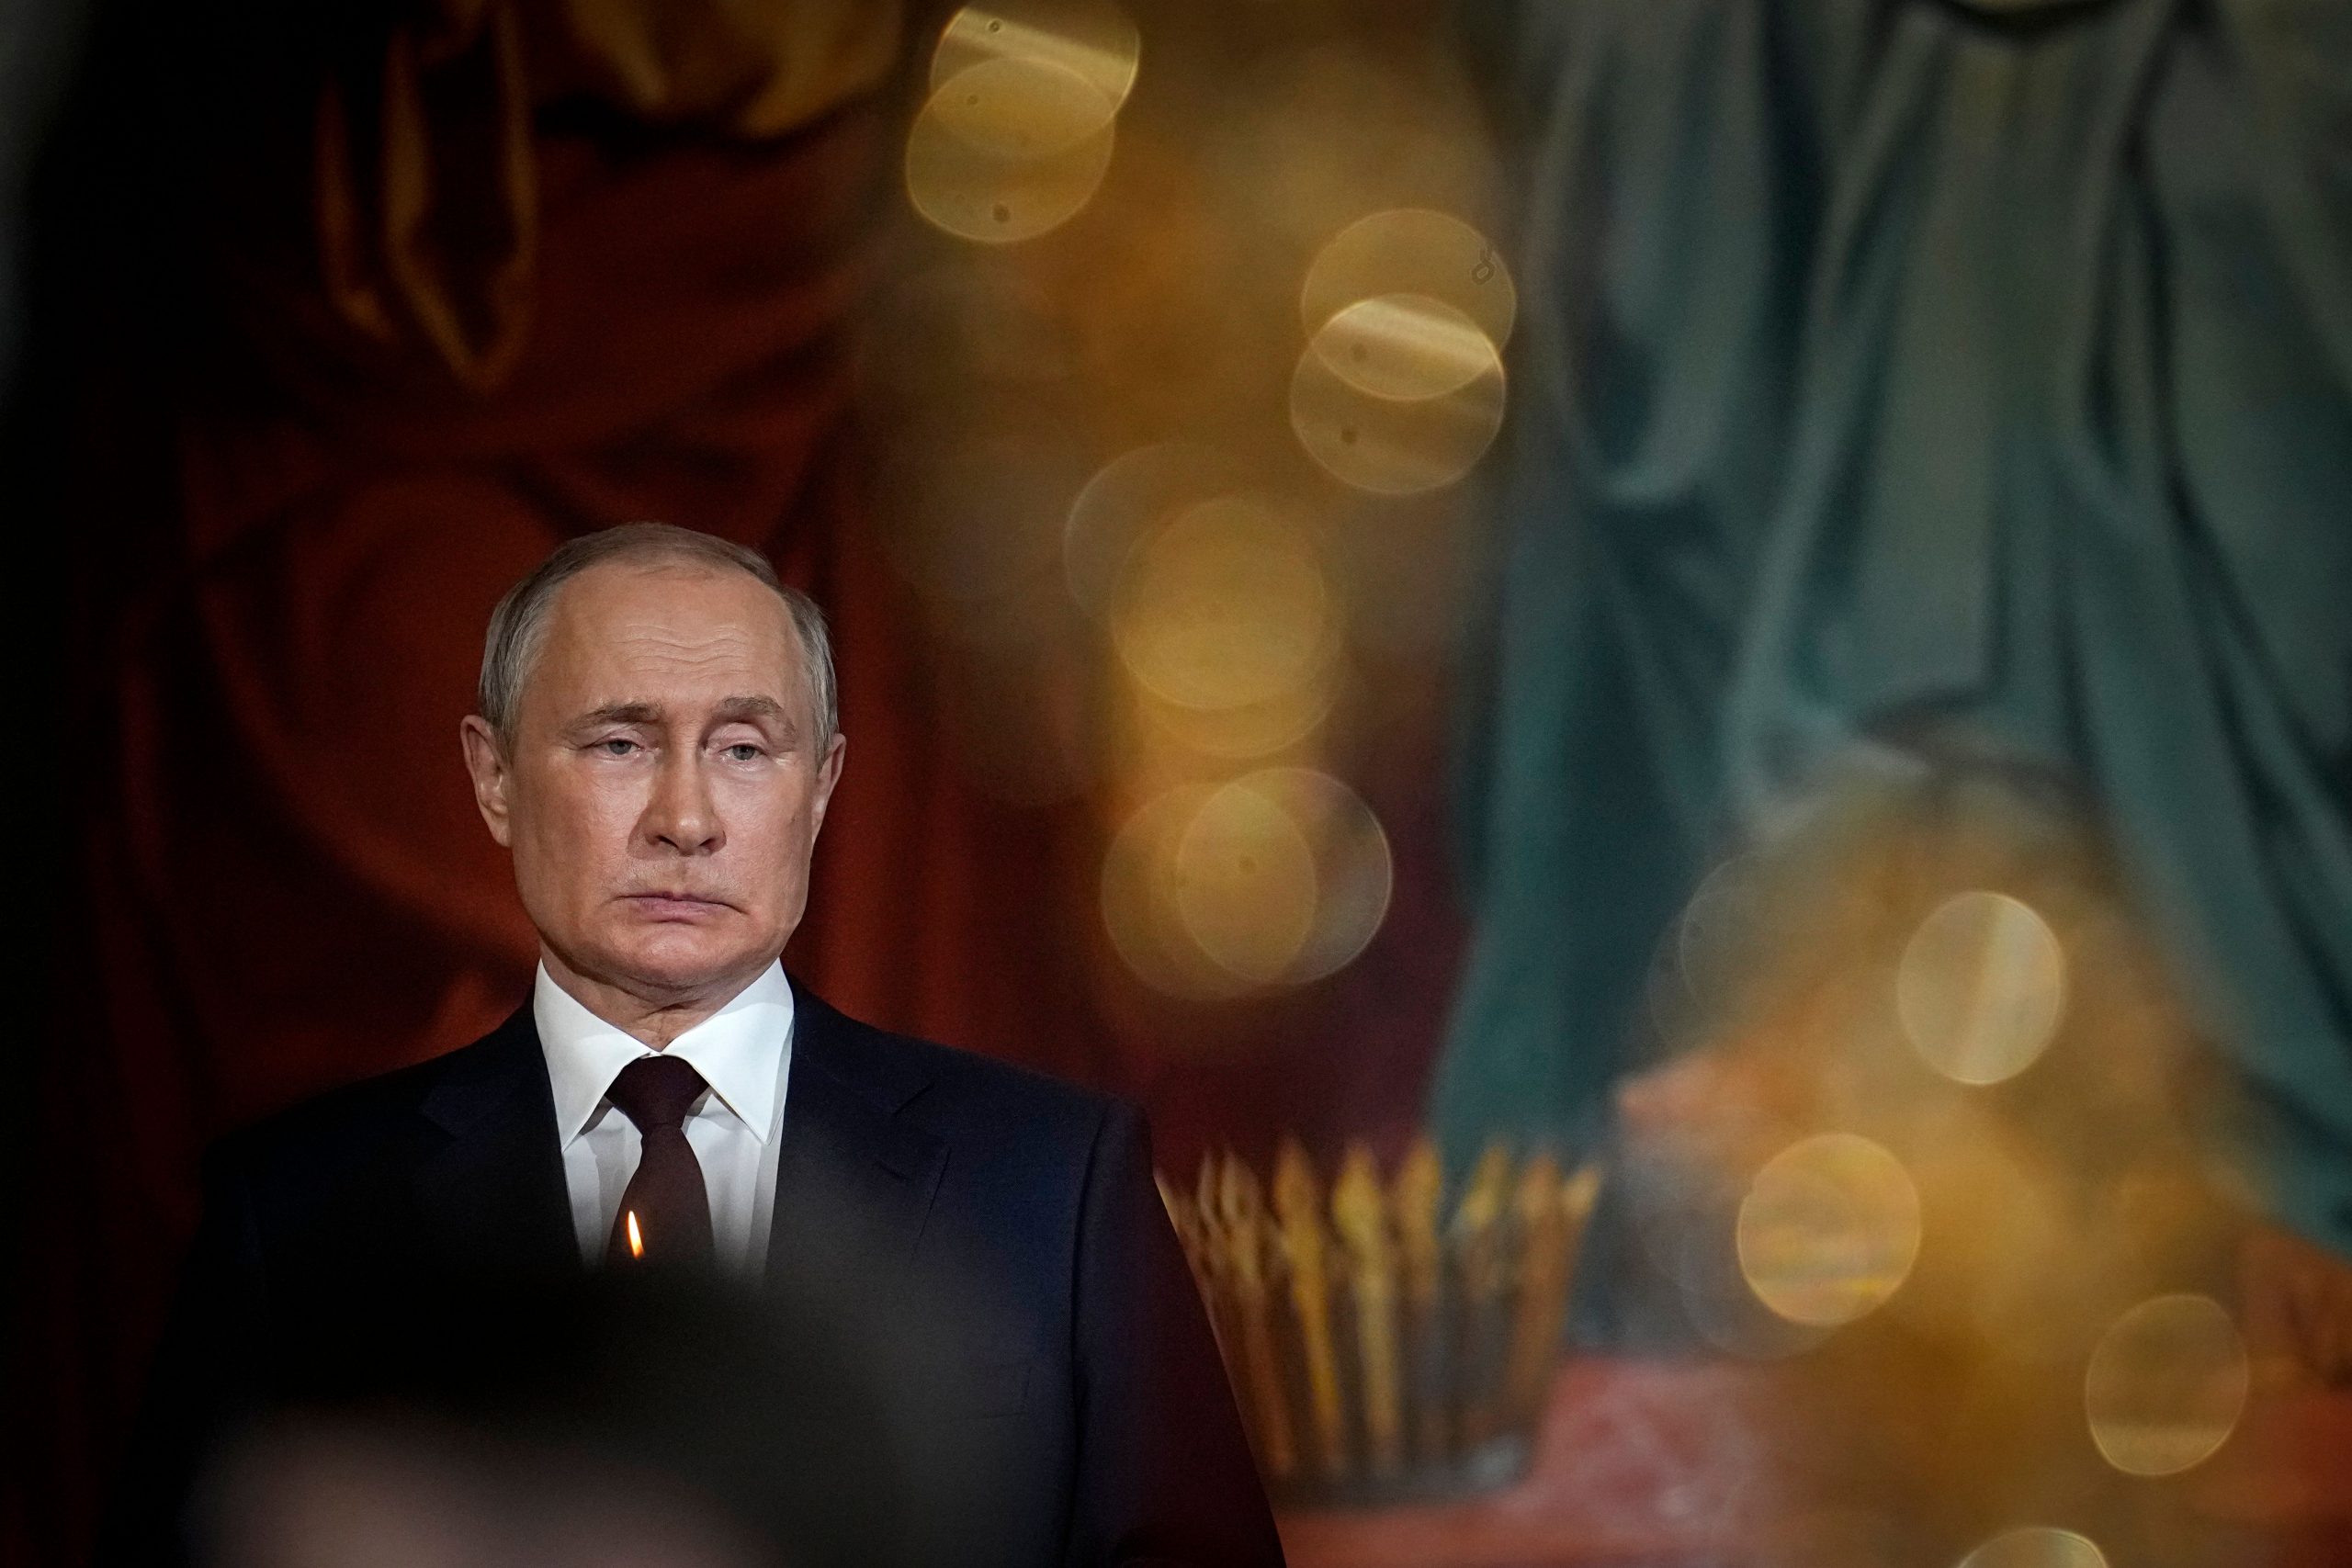 Vladimir Putin is ‘at an absolute dead end’: Examining Ukraine’s claims